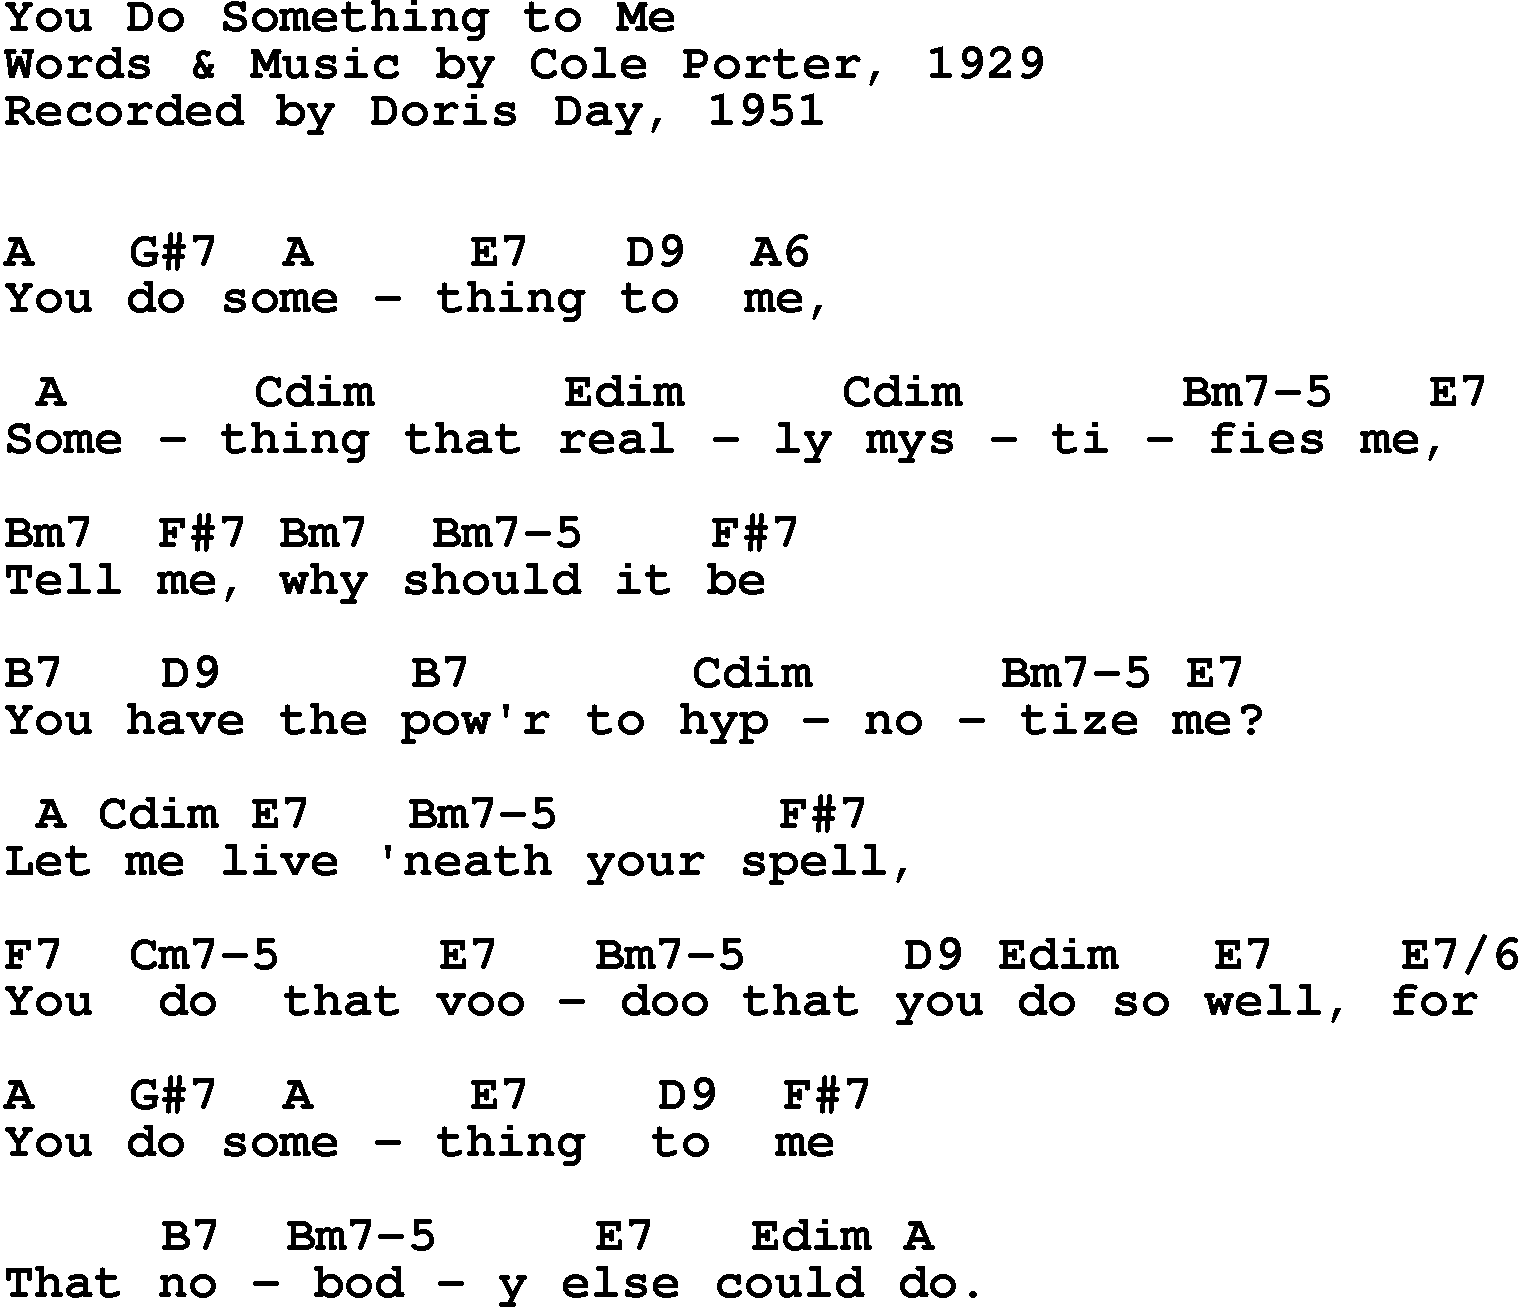 Song Lyrics with guitar chords for You Do Something To Me - Doris Day, 1951